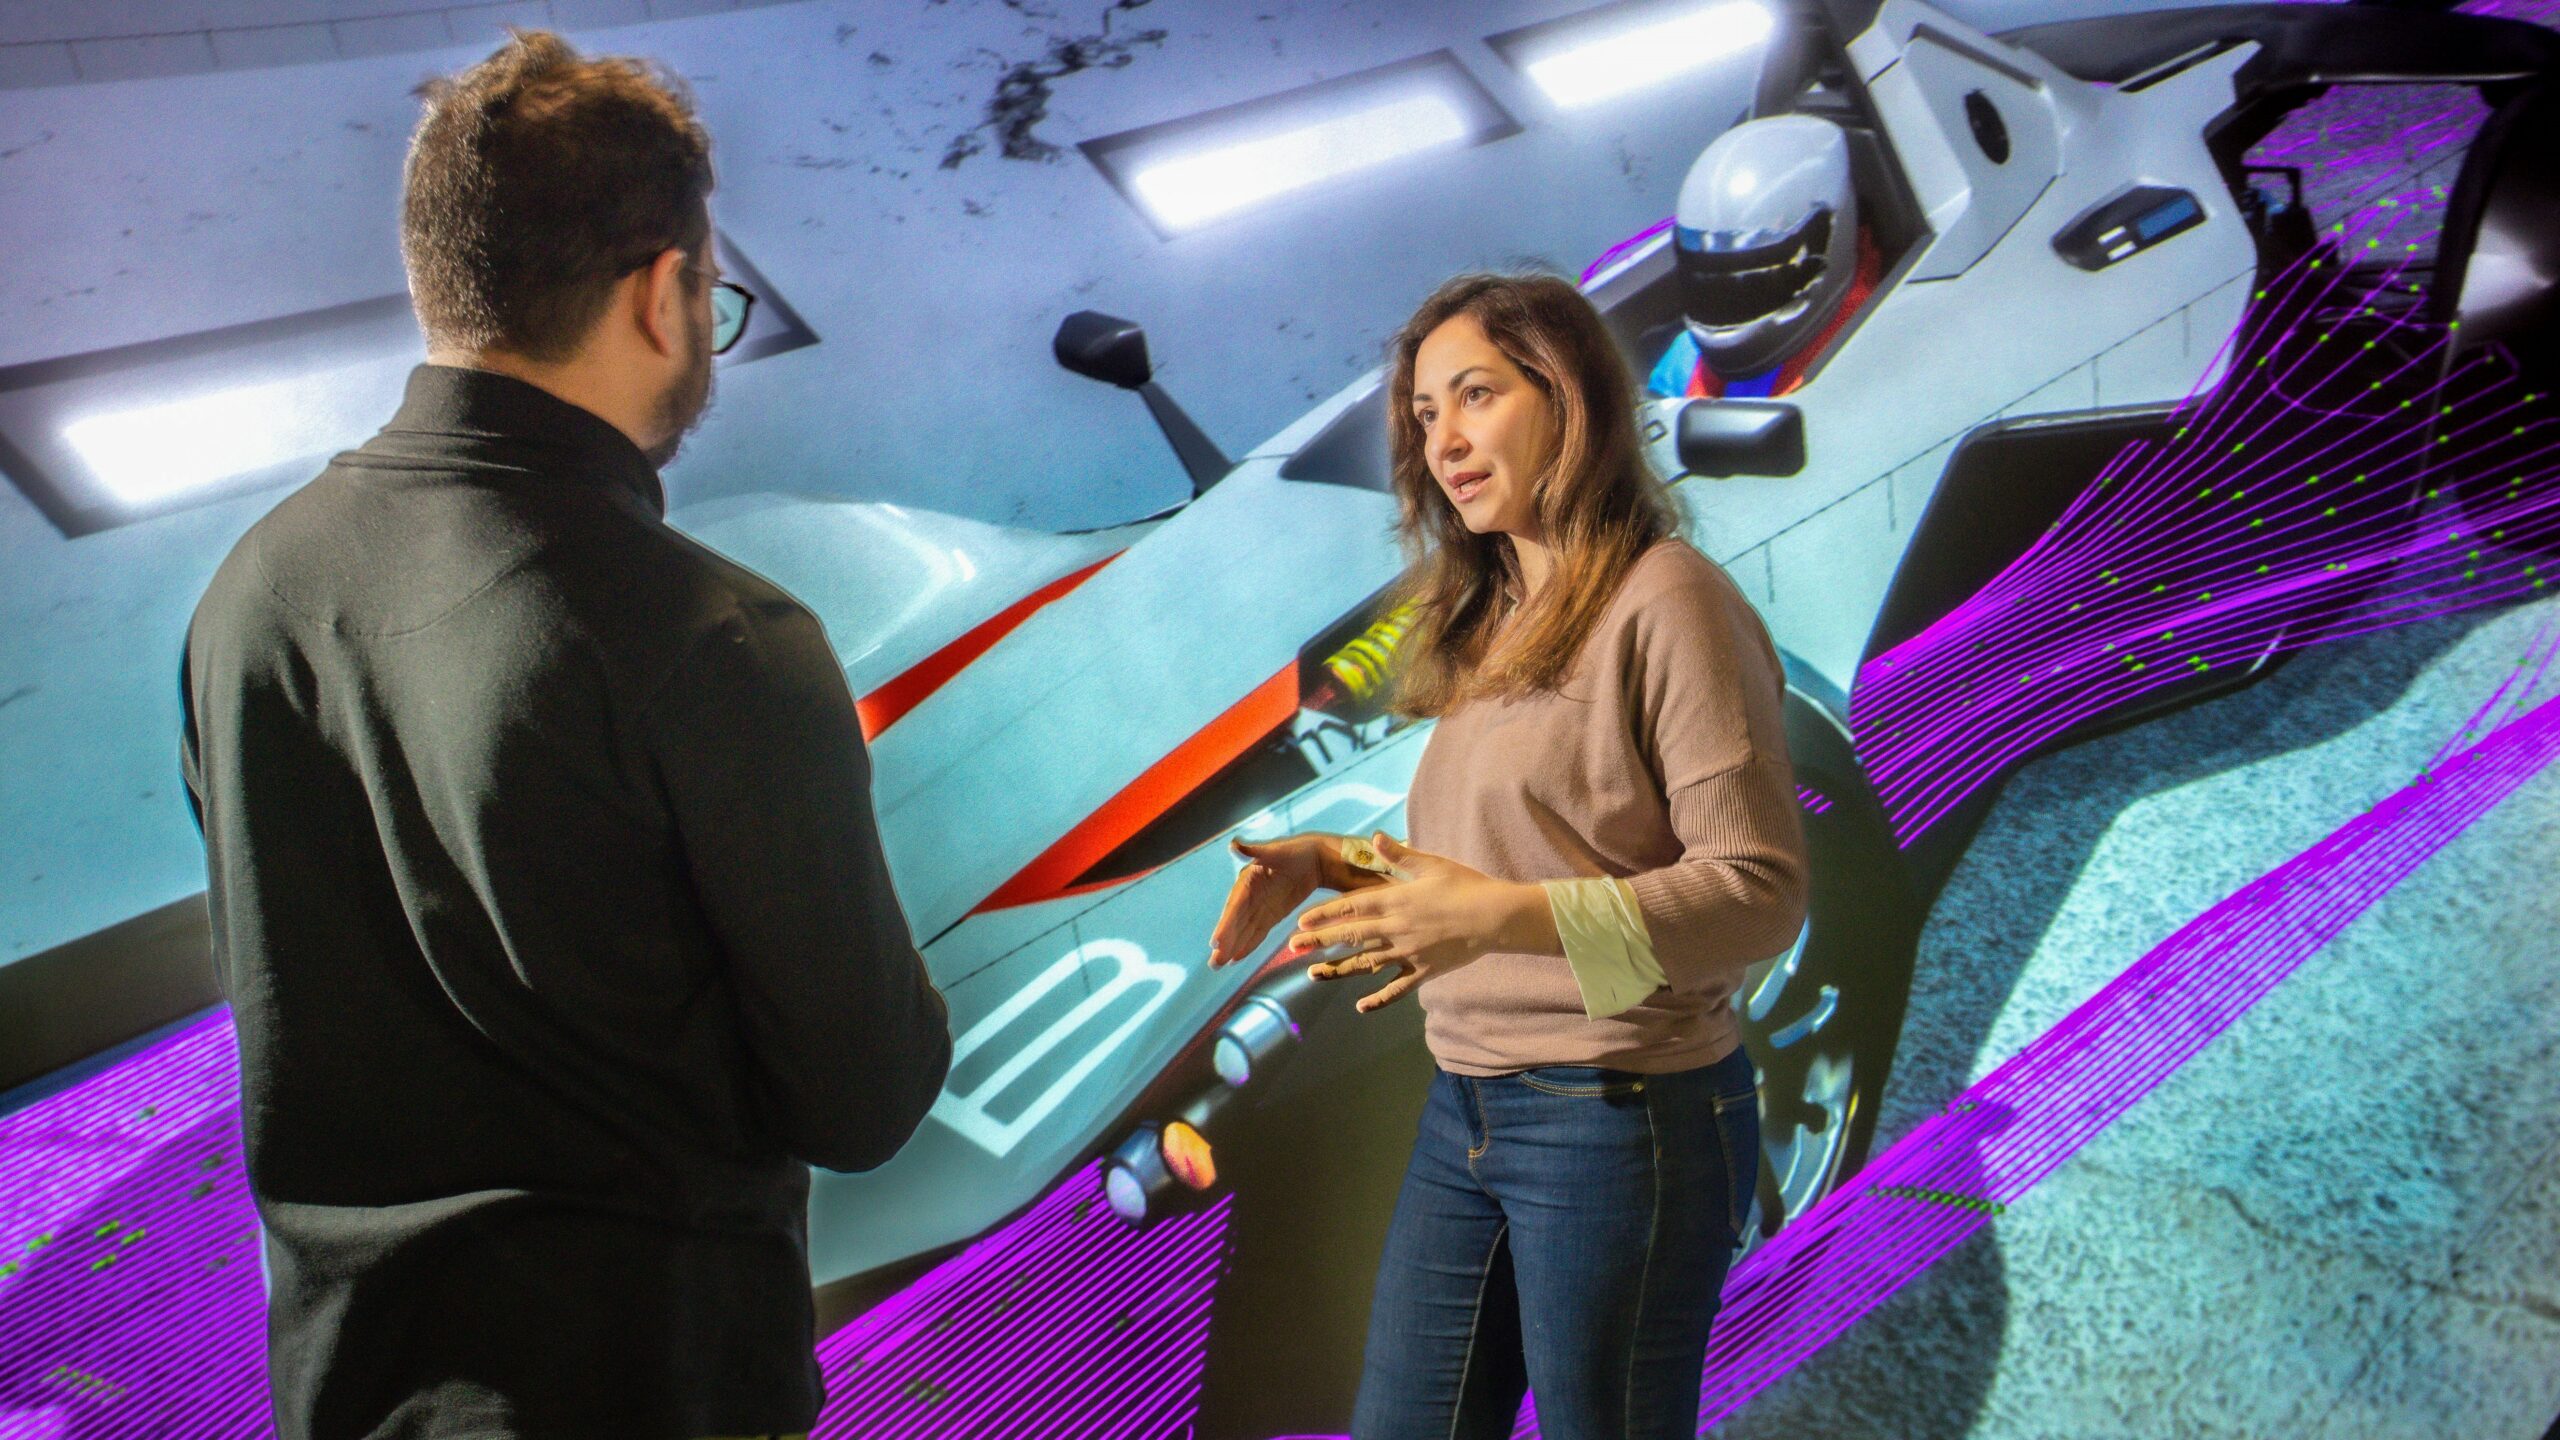 A woman and a man stand in front of a virtual wind tunnel visualisation showing streamlines over a racecar.